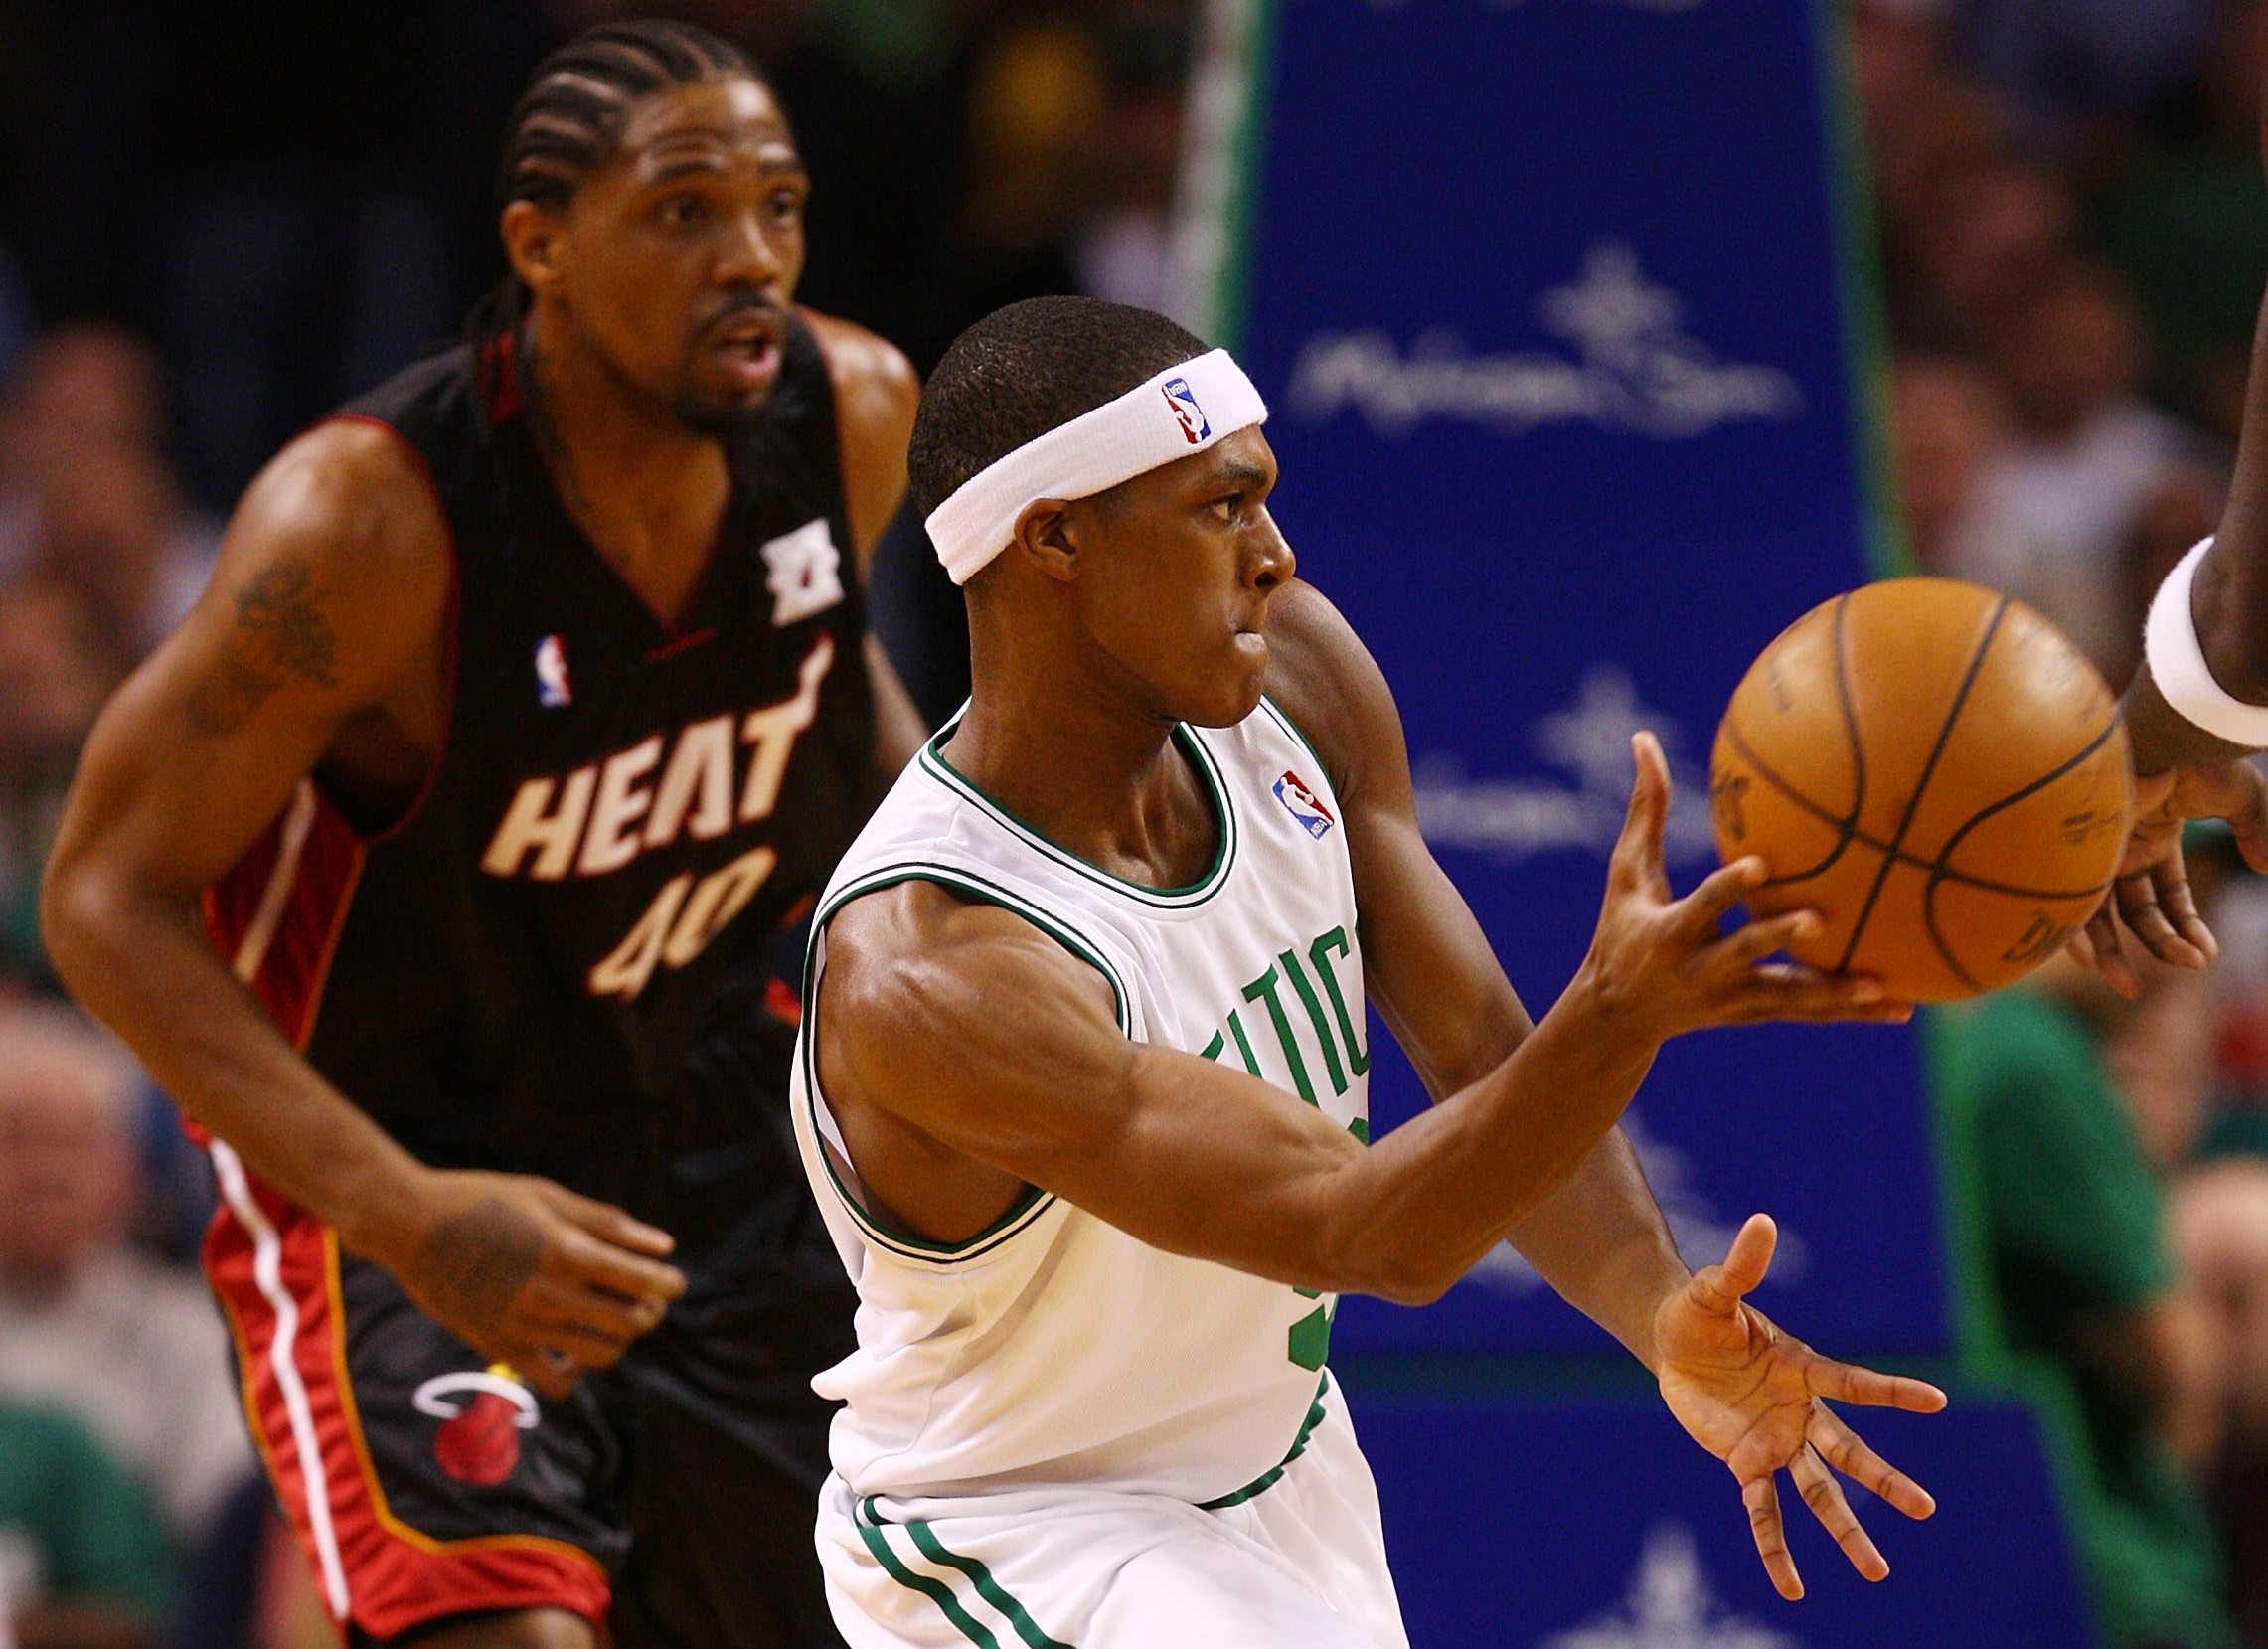 Rajon Rondo of the Boston Celtics passes the ball as Udonis Haslem of the Miami Heat defends.